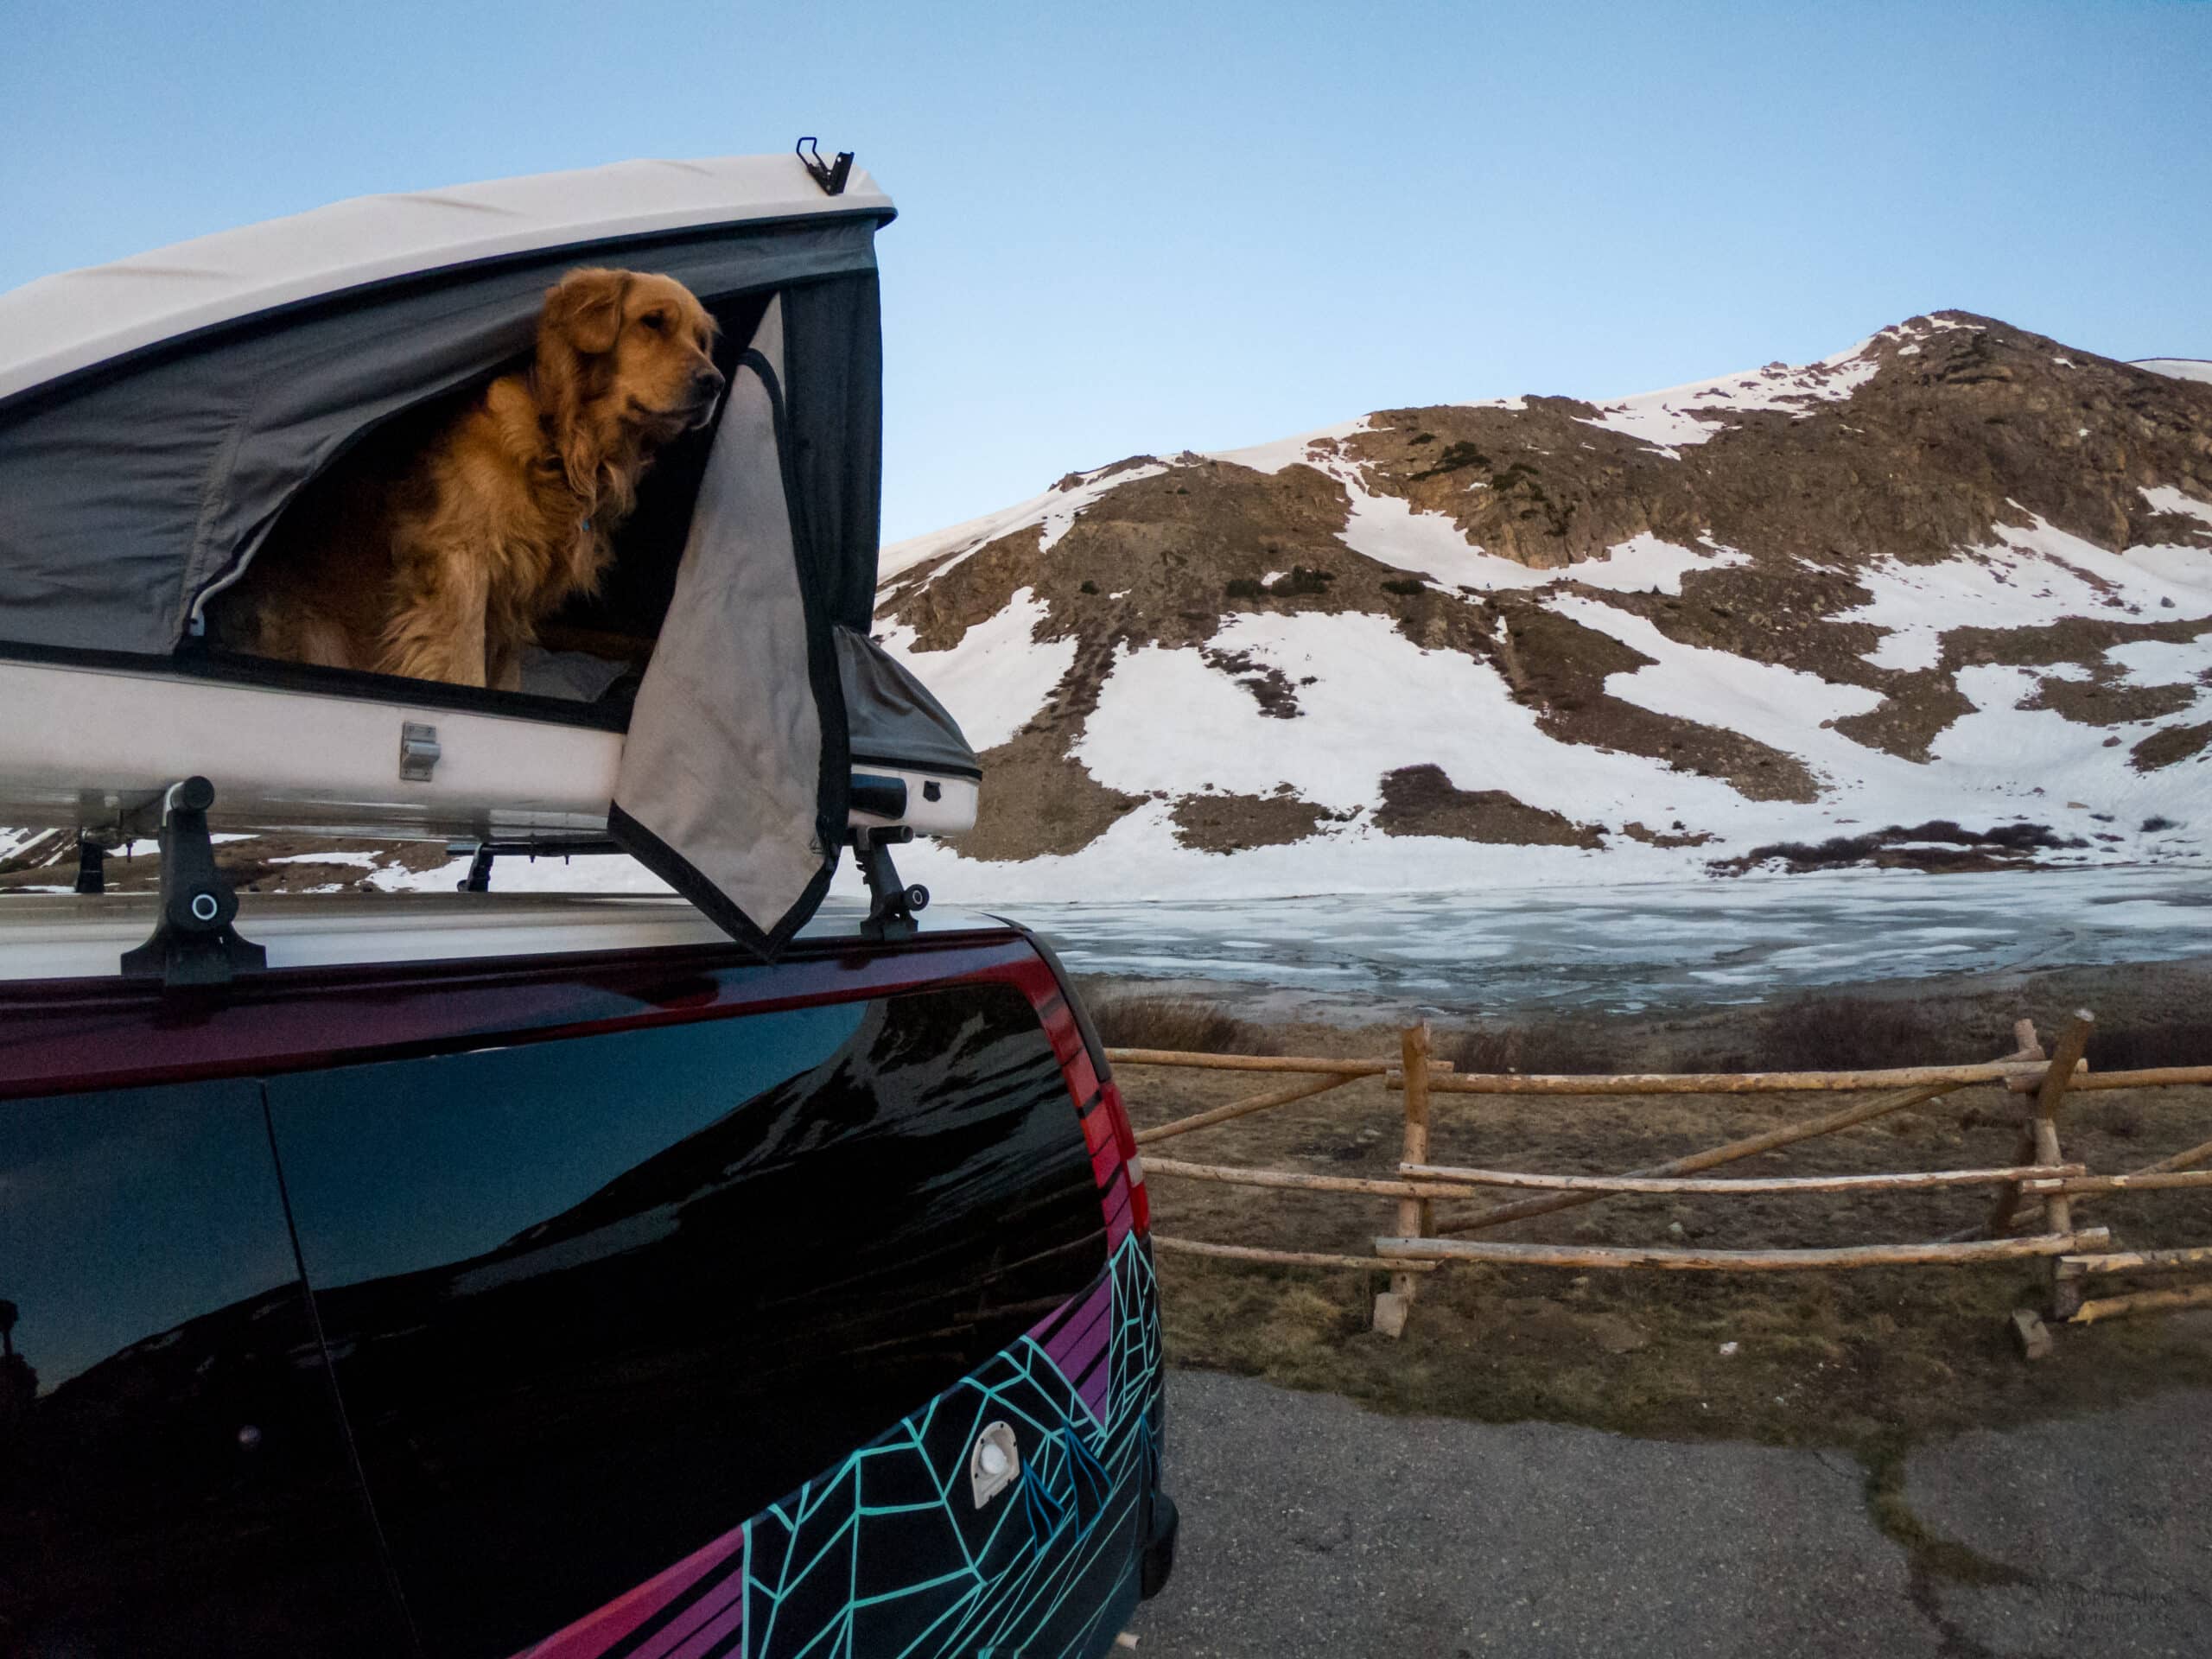 Explore the National Parks in Colorado with you furry friends in an Escape camper van.